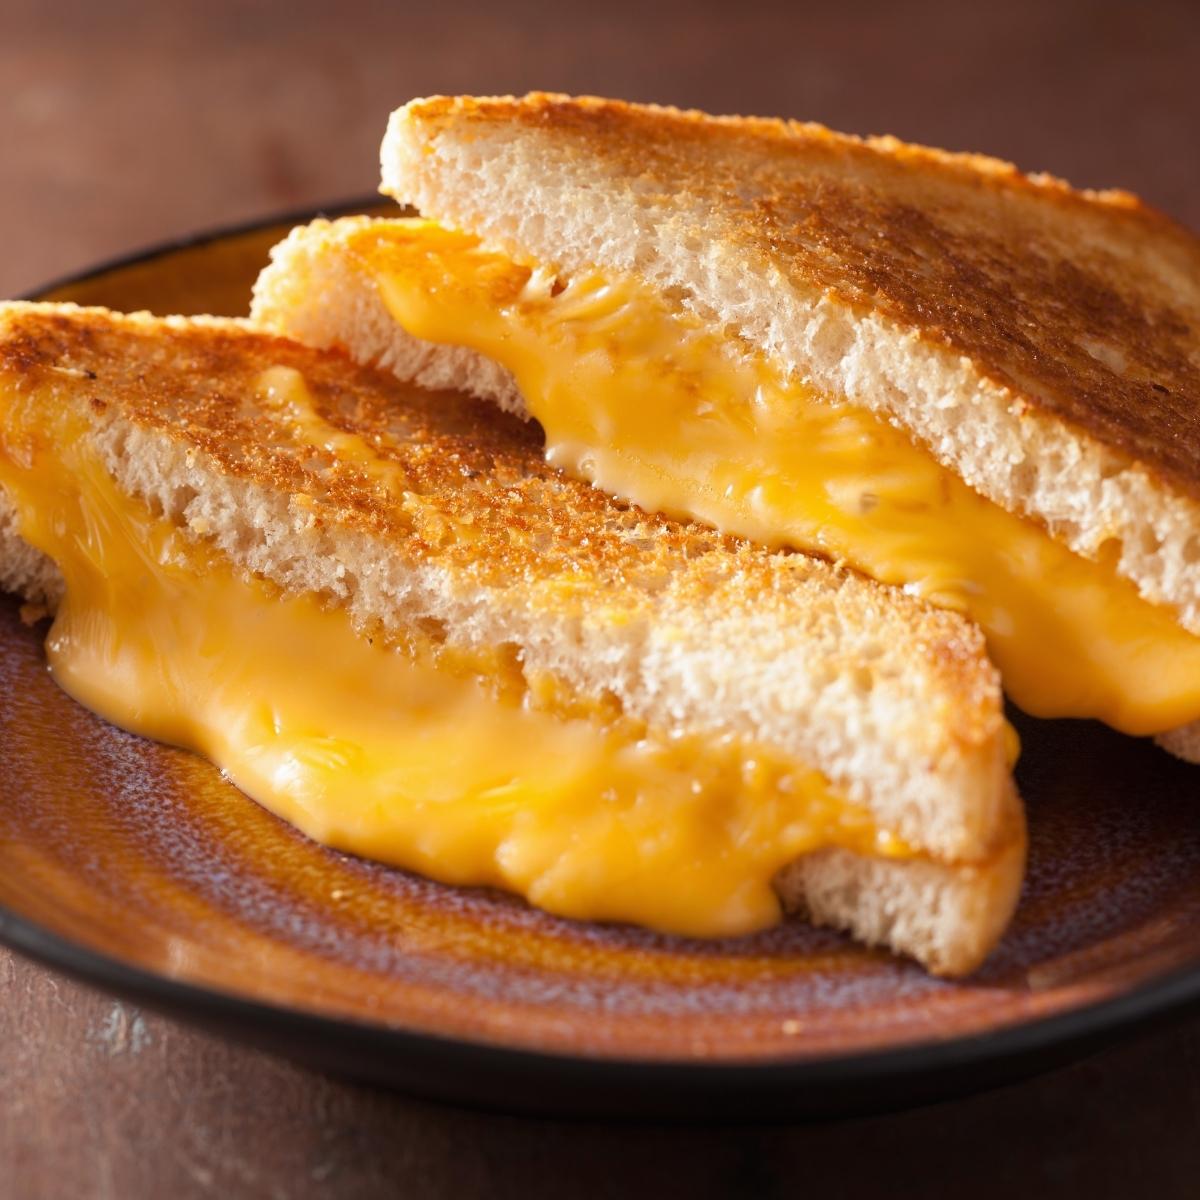 What to Eat with Grilled Cheese - 30 Tasty Sides